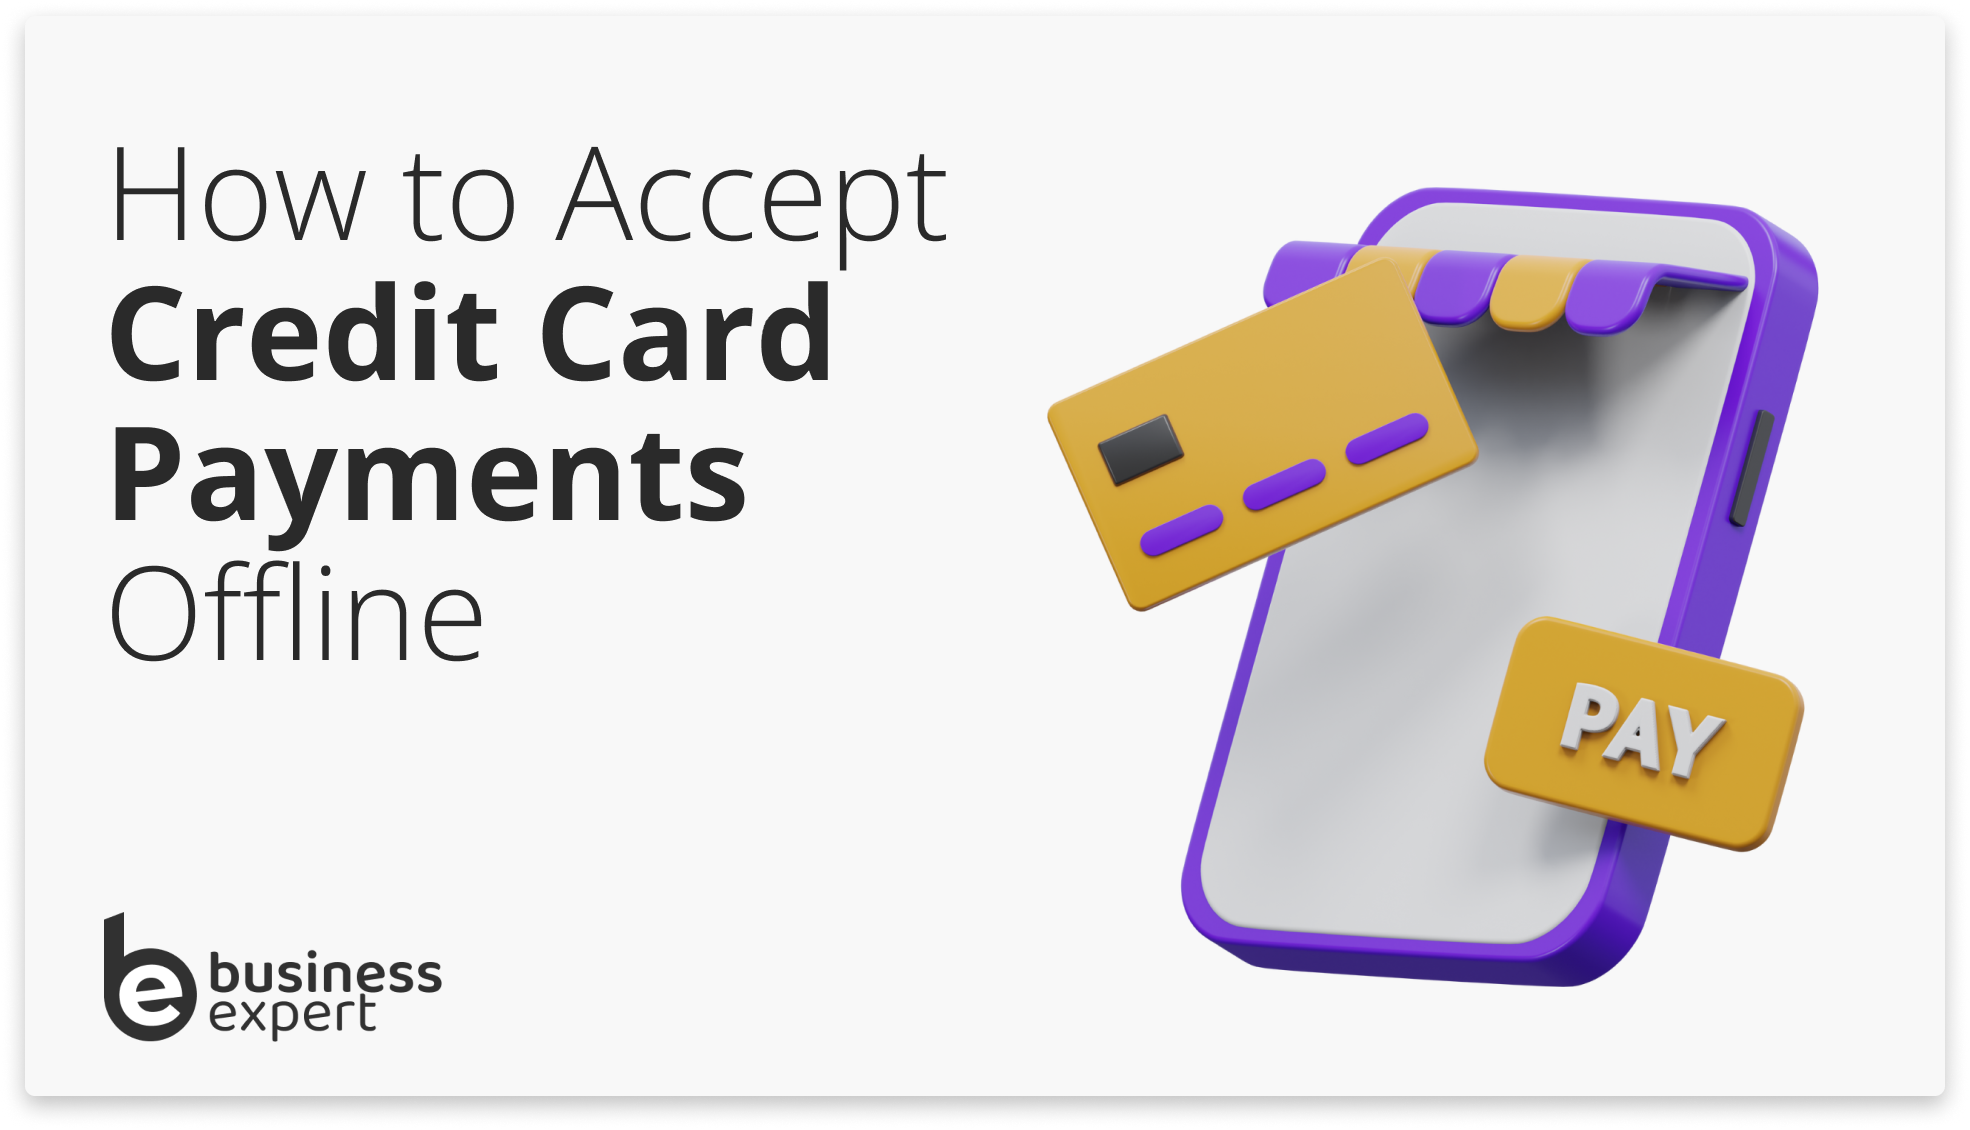 How to Accept Credit Card Payments Offline